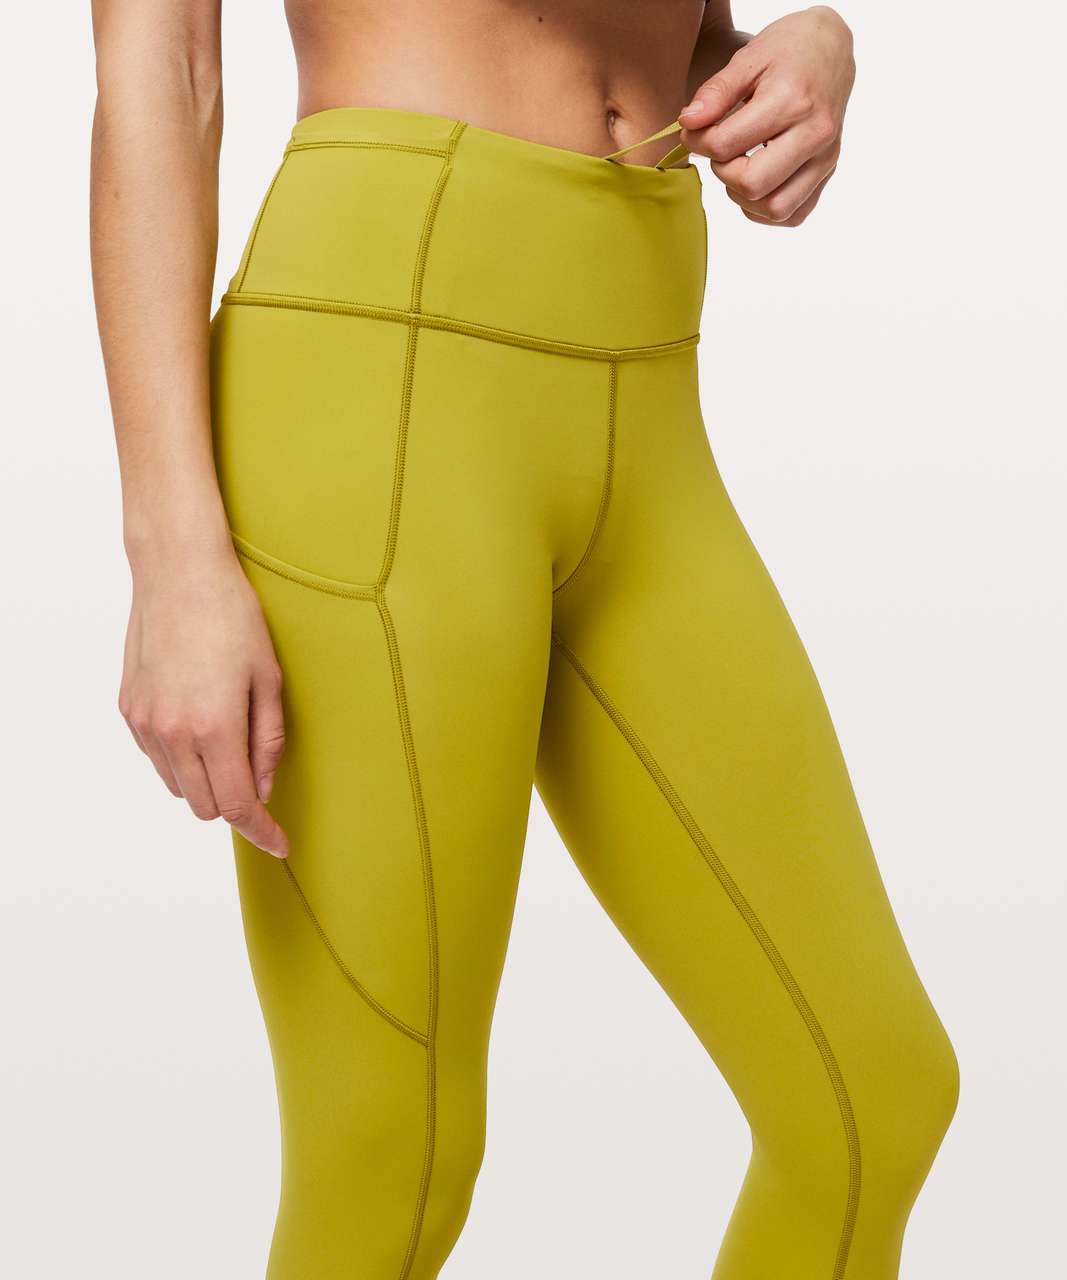 Lululemon Fast and Free Tight II 25 *Non-Reflective Nulux - Golden Lime -  lulu fanatics